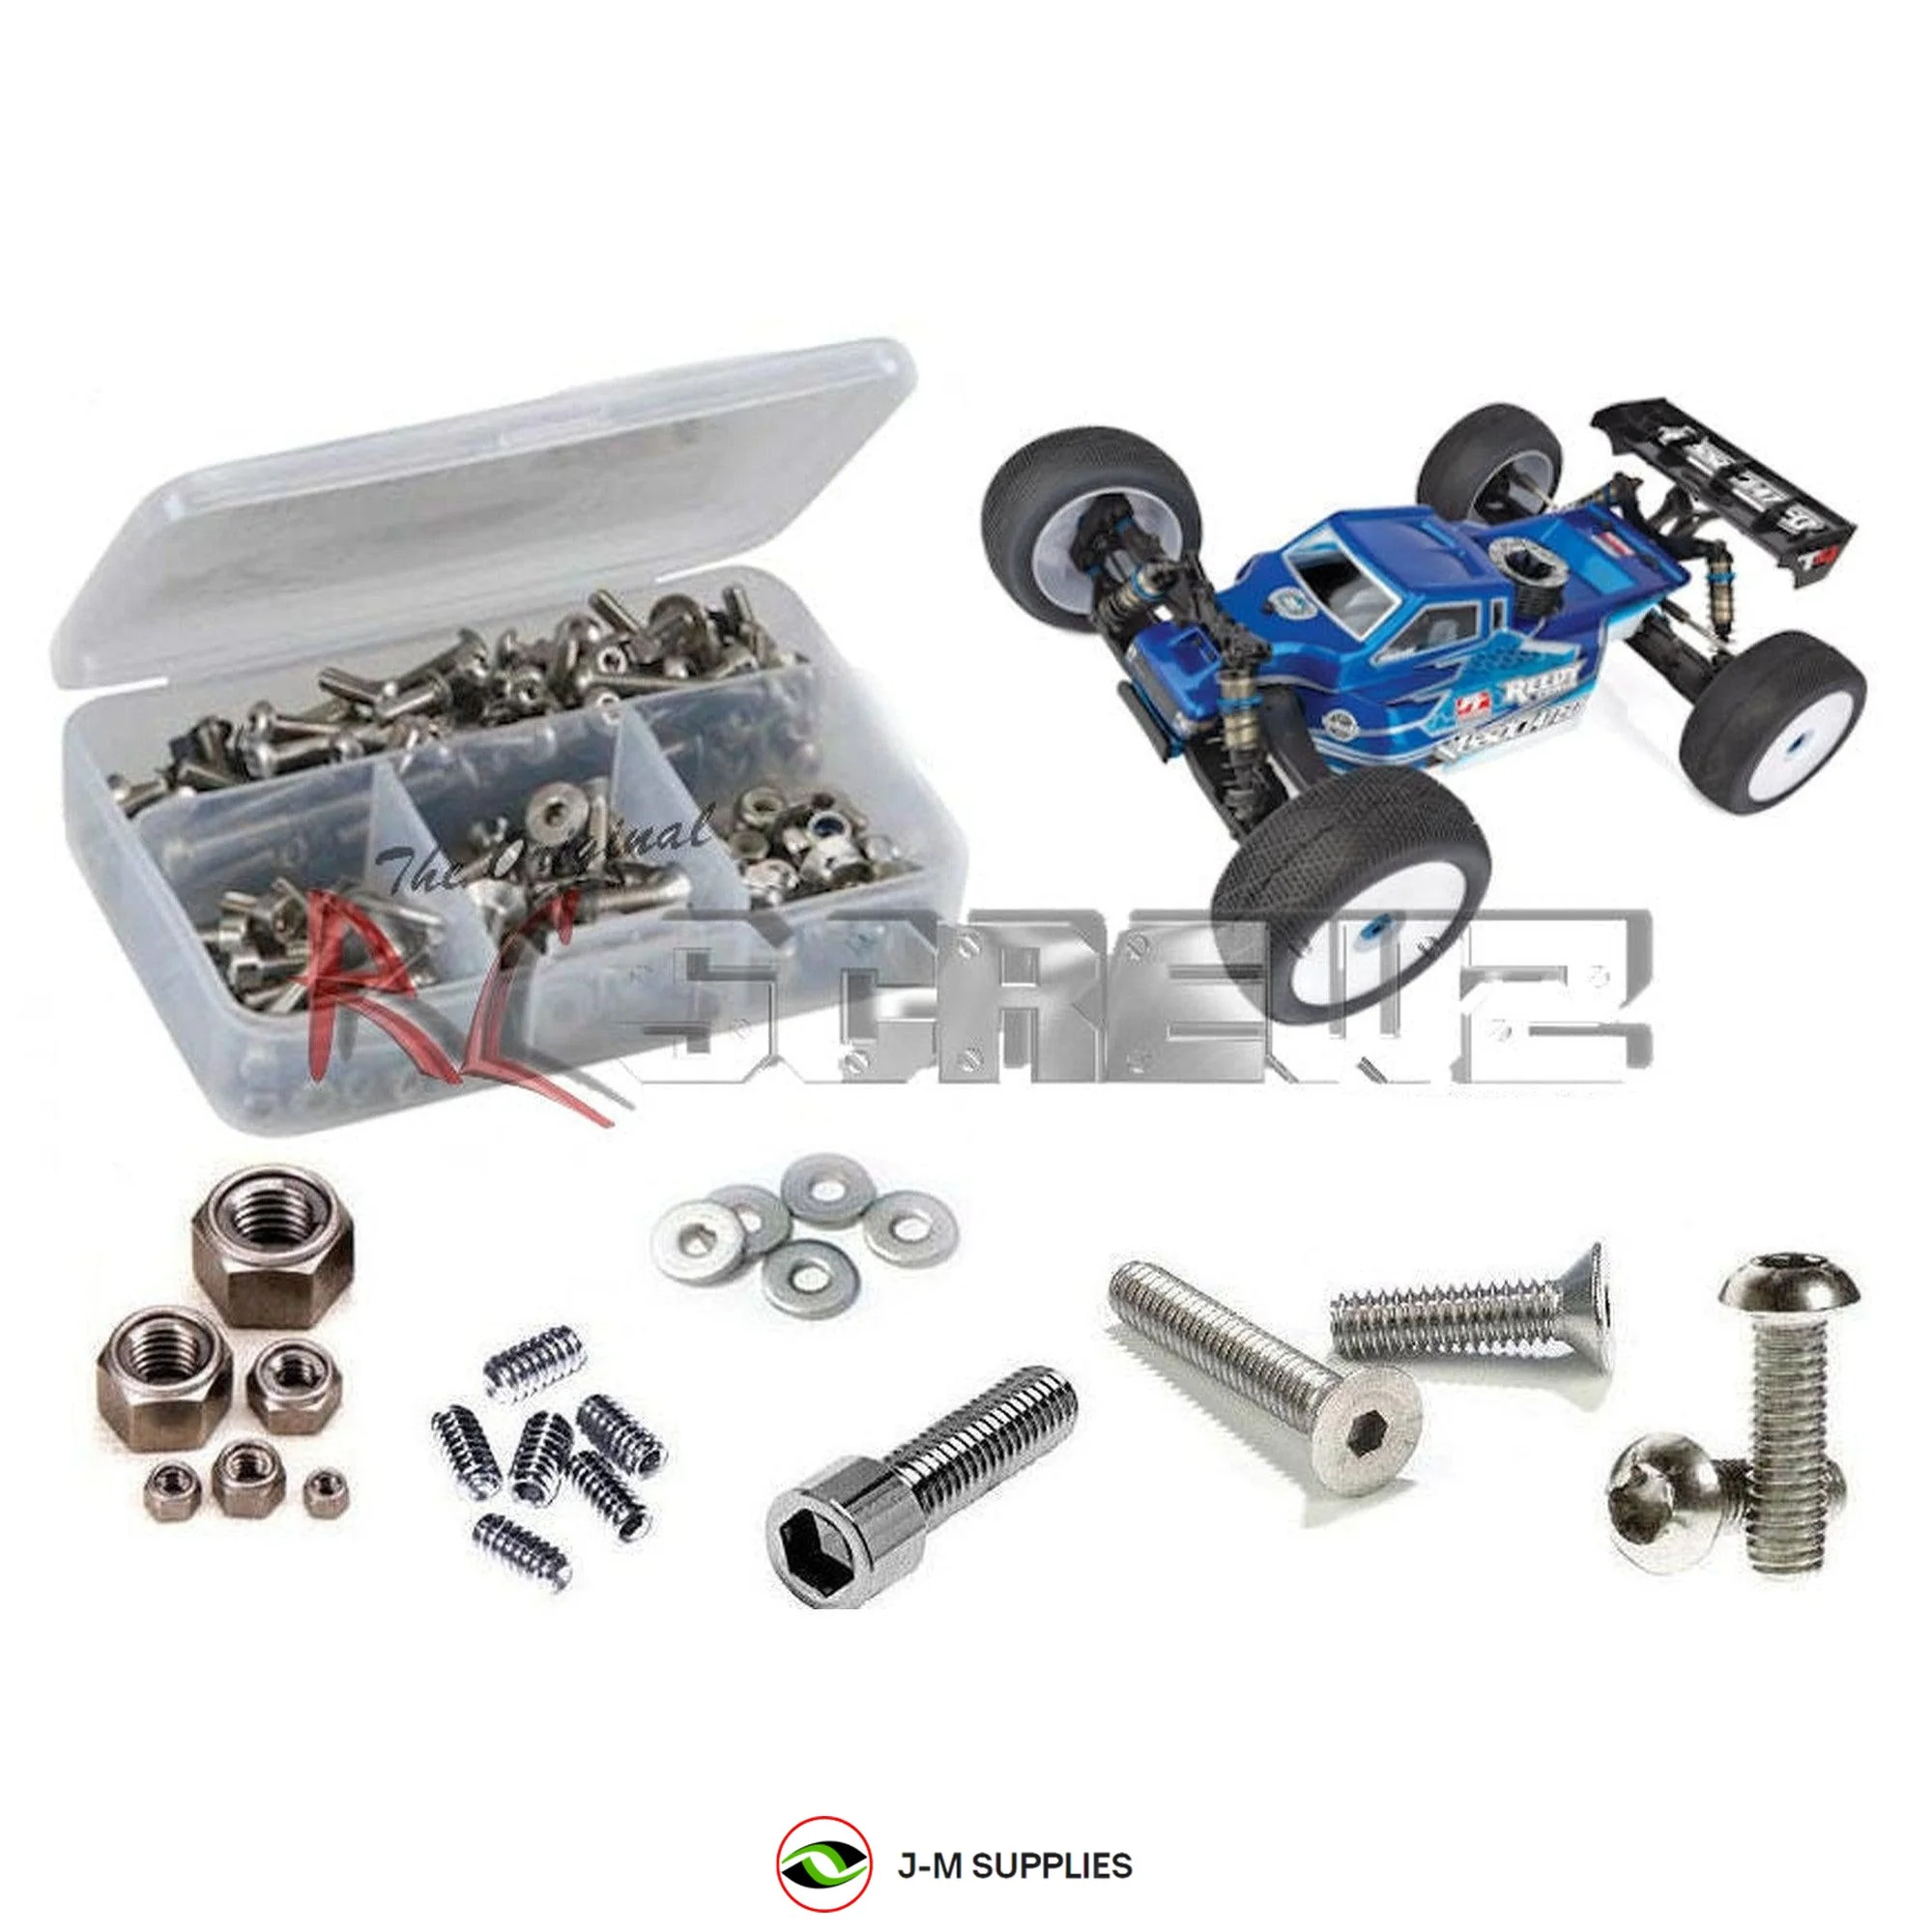 RCScrewZ Stainless Screw Kit asc142 for Team Associated RC8T4 Nitro 1/8th #80947 - Picture 1 of 12